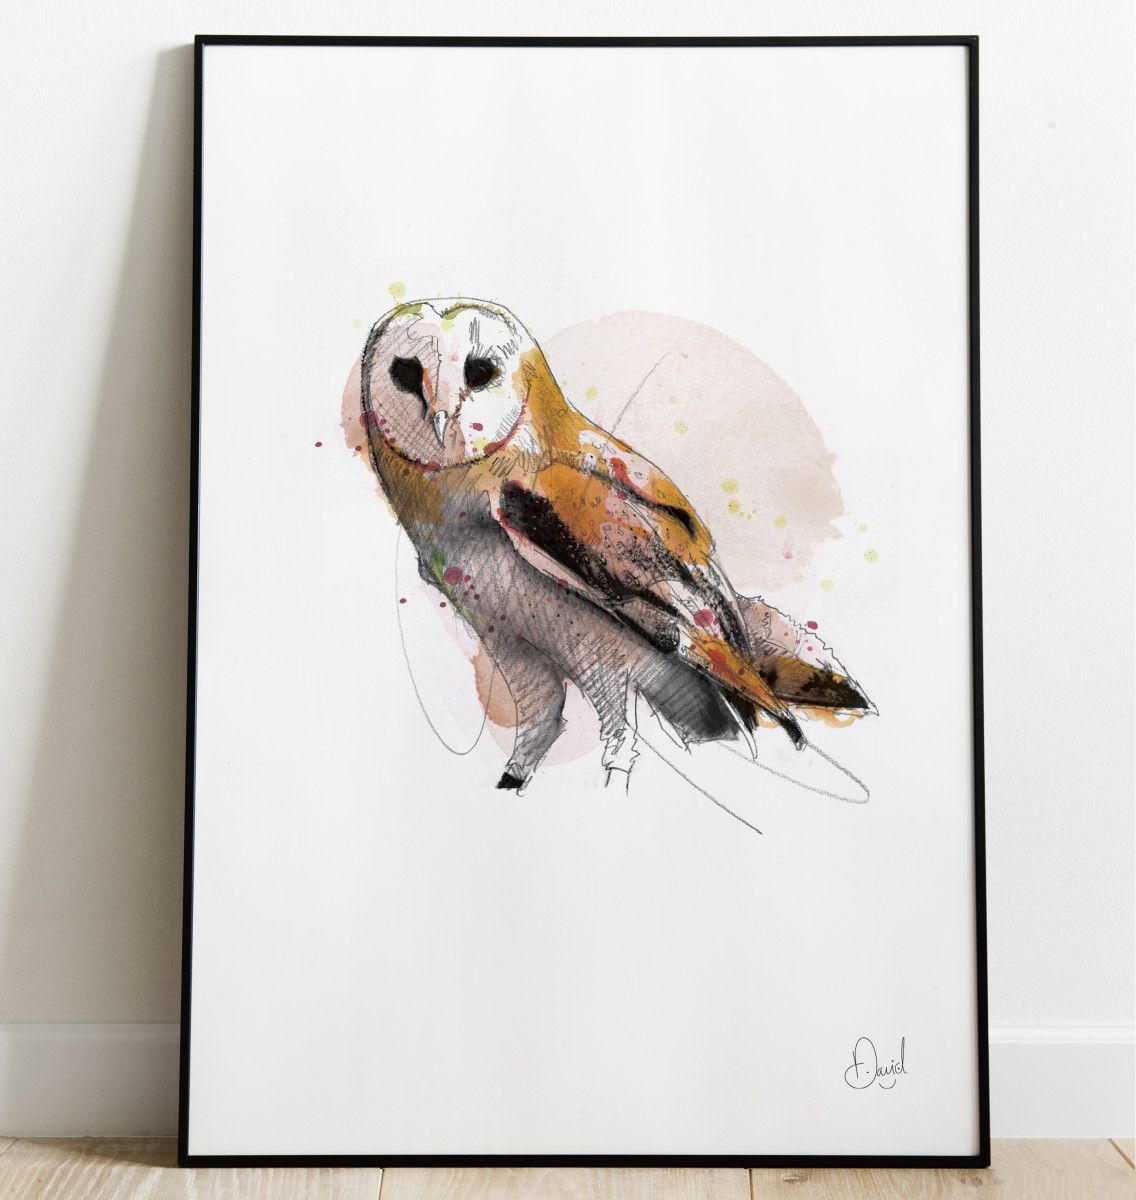 The wise old owl - Owl art print